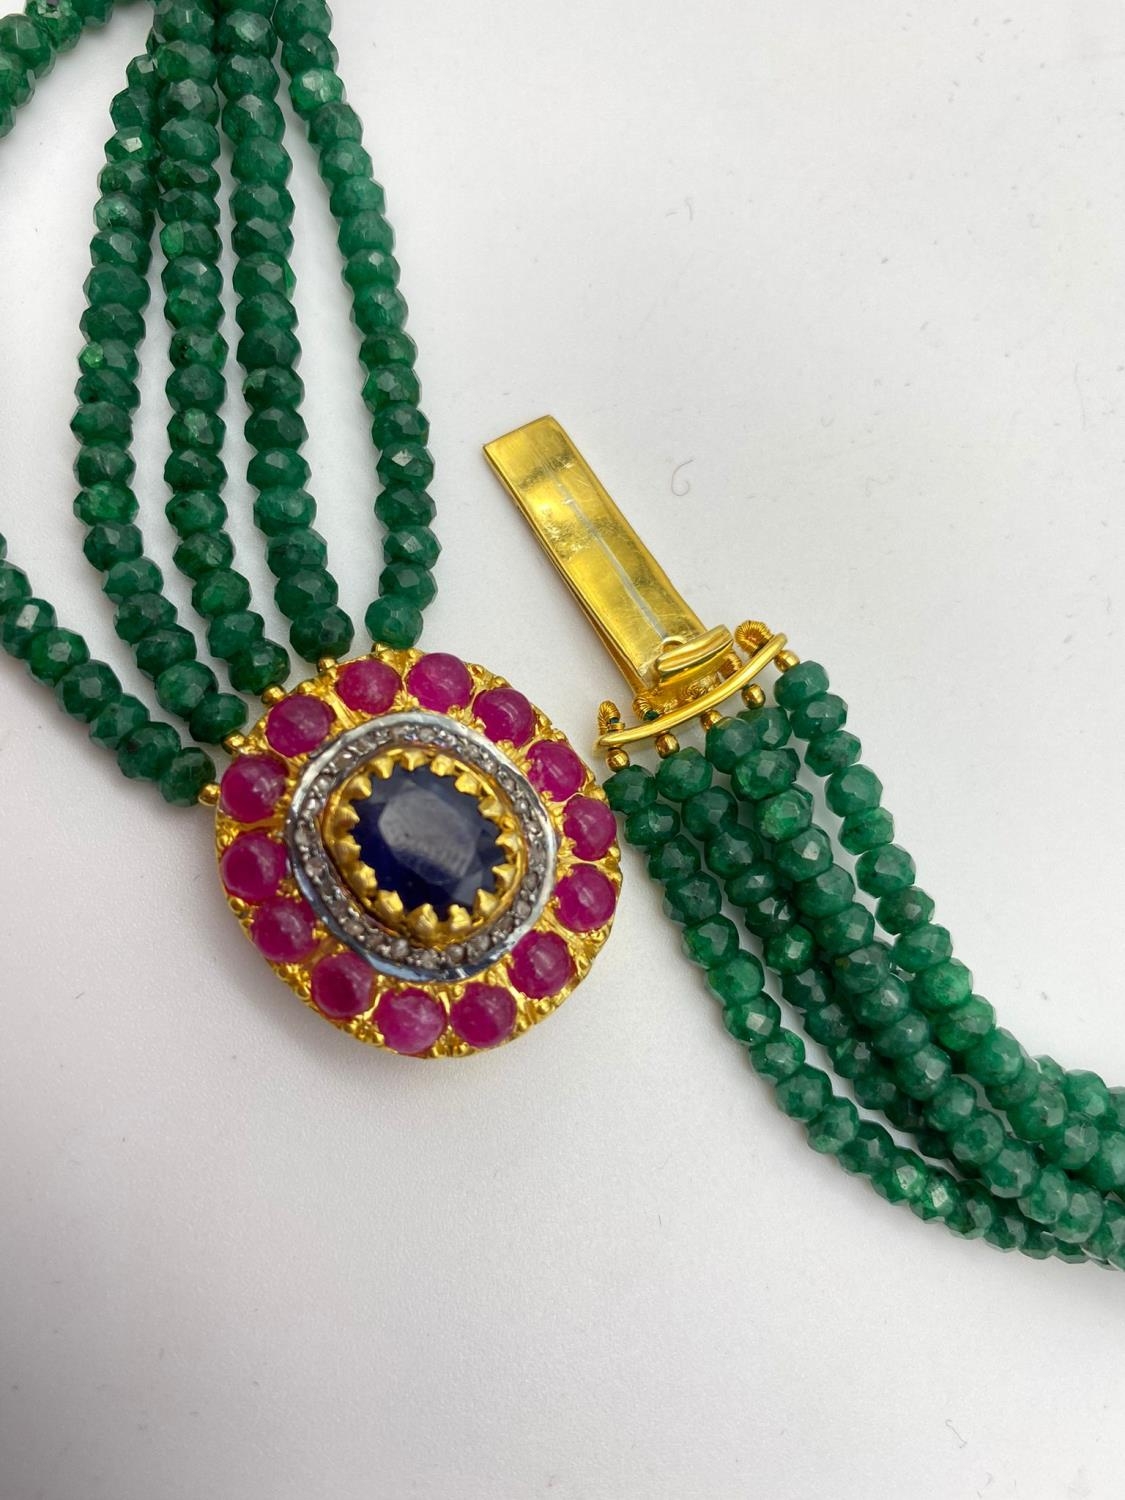 395cts Five-Row Emerald Necklace with Ruby and Sapphire Clasp. With a halo of Rose Cut Diamonds. - Image 9 of 9